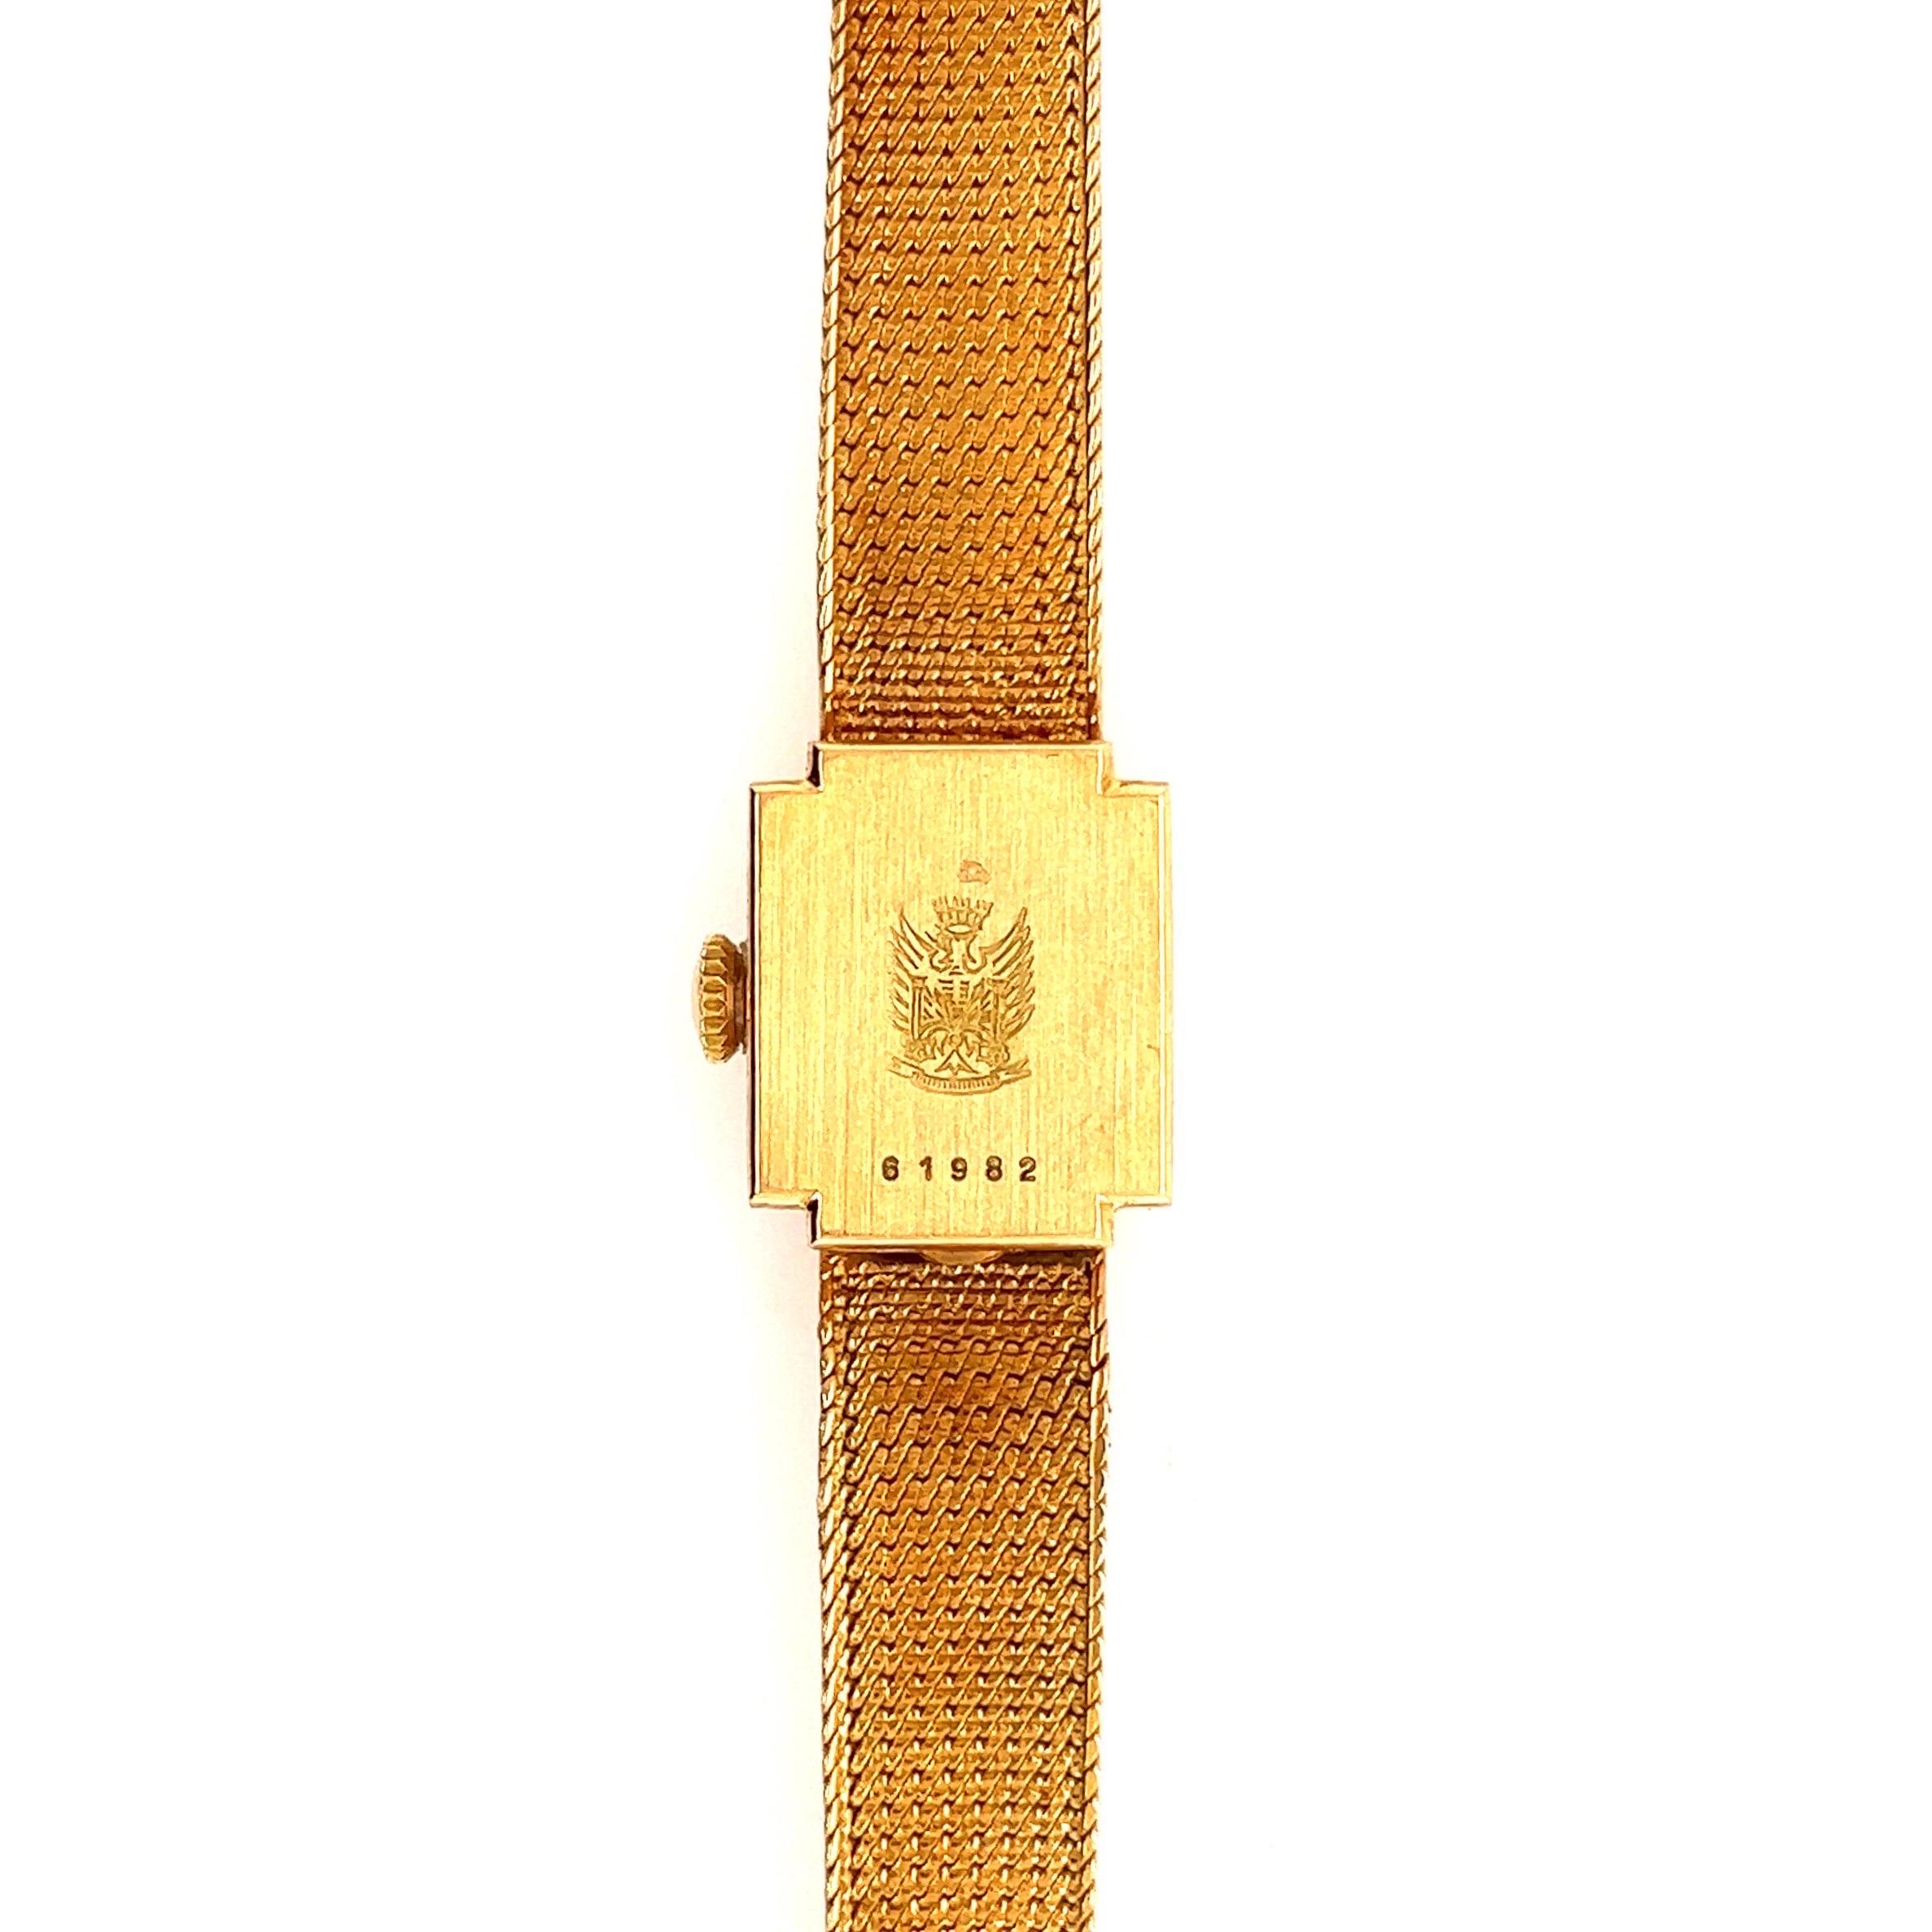 Looking for a vintage women's wristwatch that combines retro style with superior quality? Look no further than the Lip women's wristwatch. Carefully crafted, this vintage watch embodies timeless elegance and refinement. This bracelet watch is a real